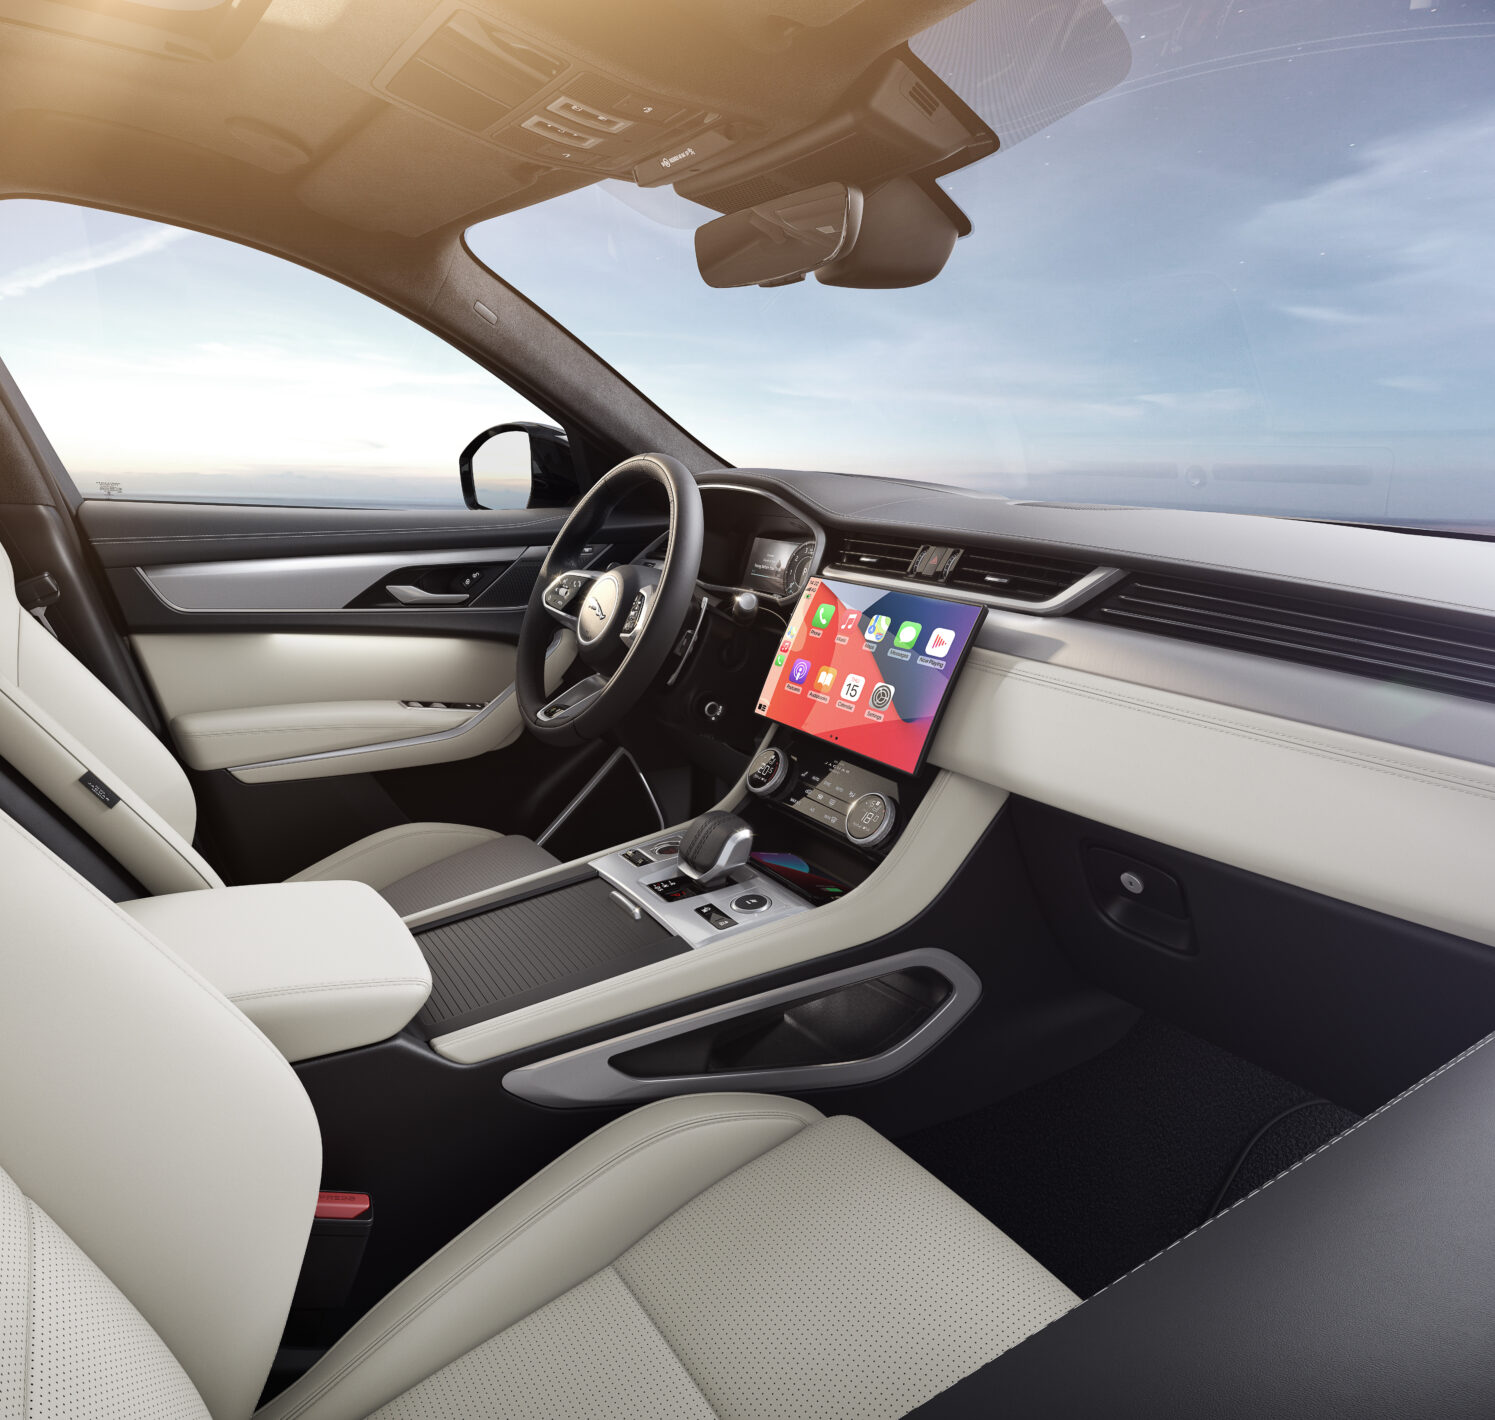 https://autofilter.sk/assets/images/f-pace/gallery/Jag_F-PACE_22MY_07_Light_Oyster_Interior_Wireless_Apple_CarPlay_110821.jpg - obrazok